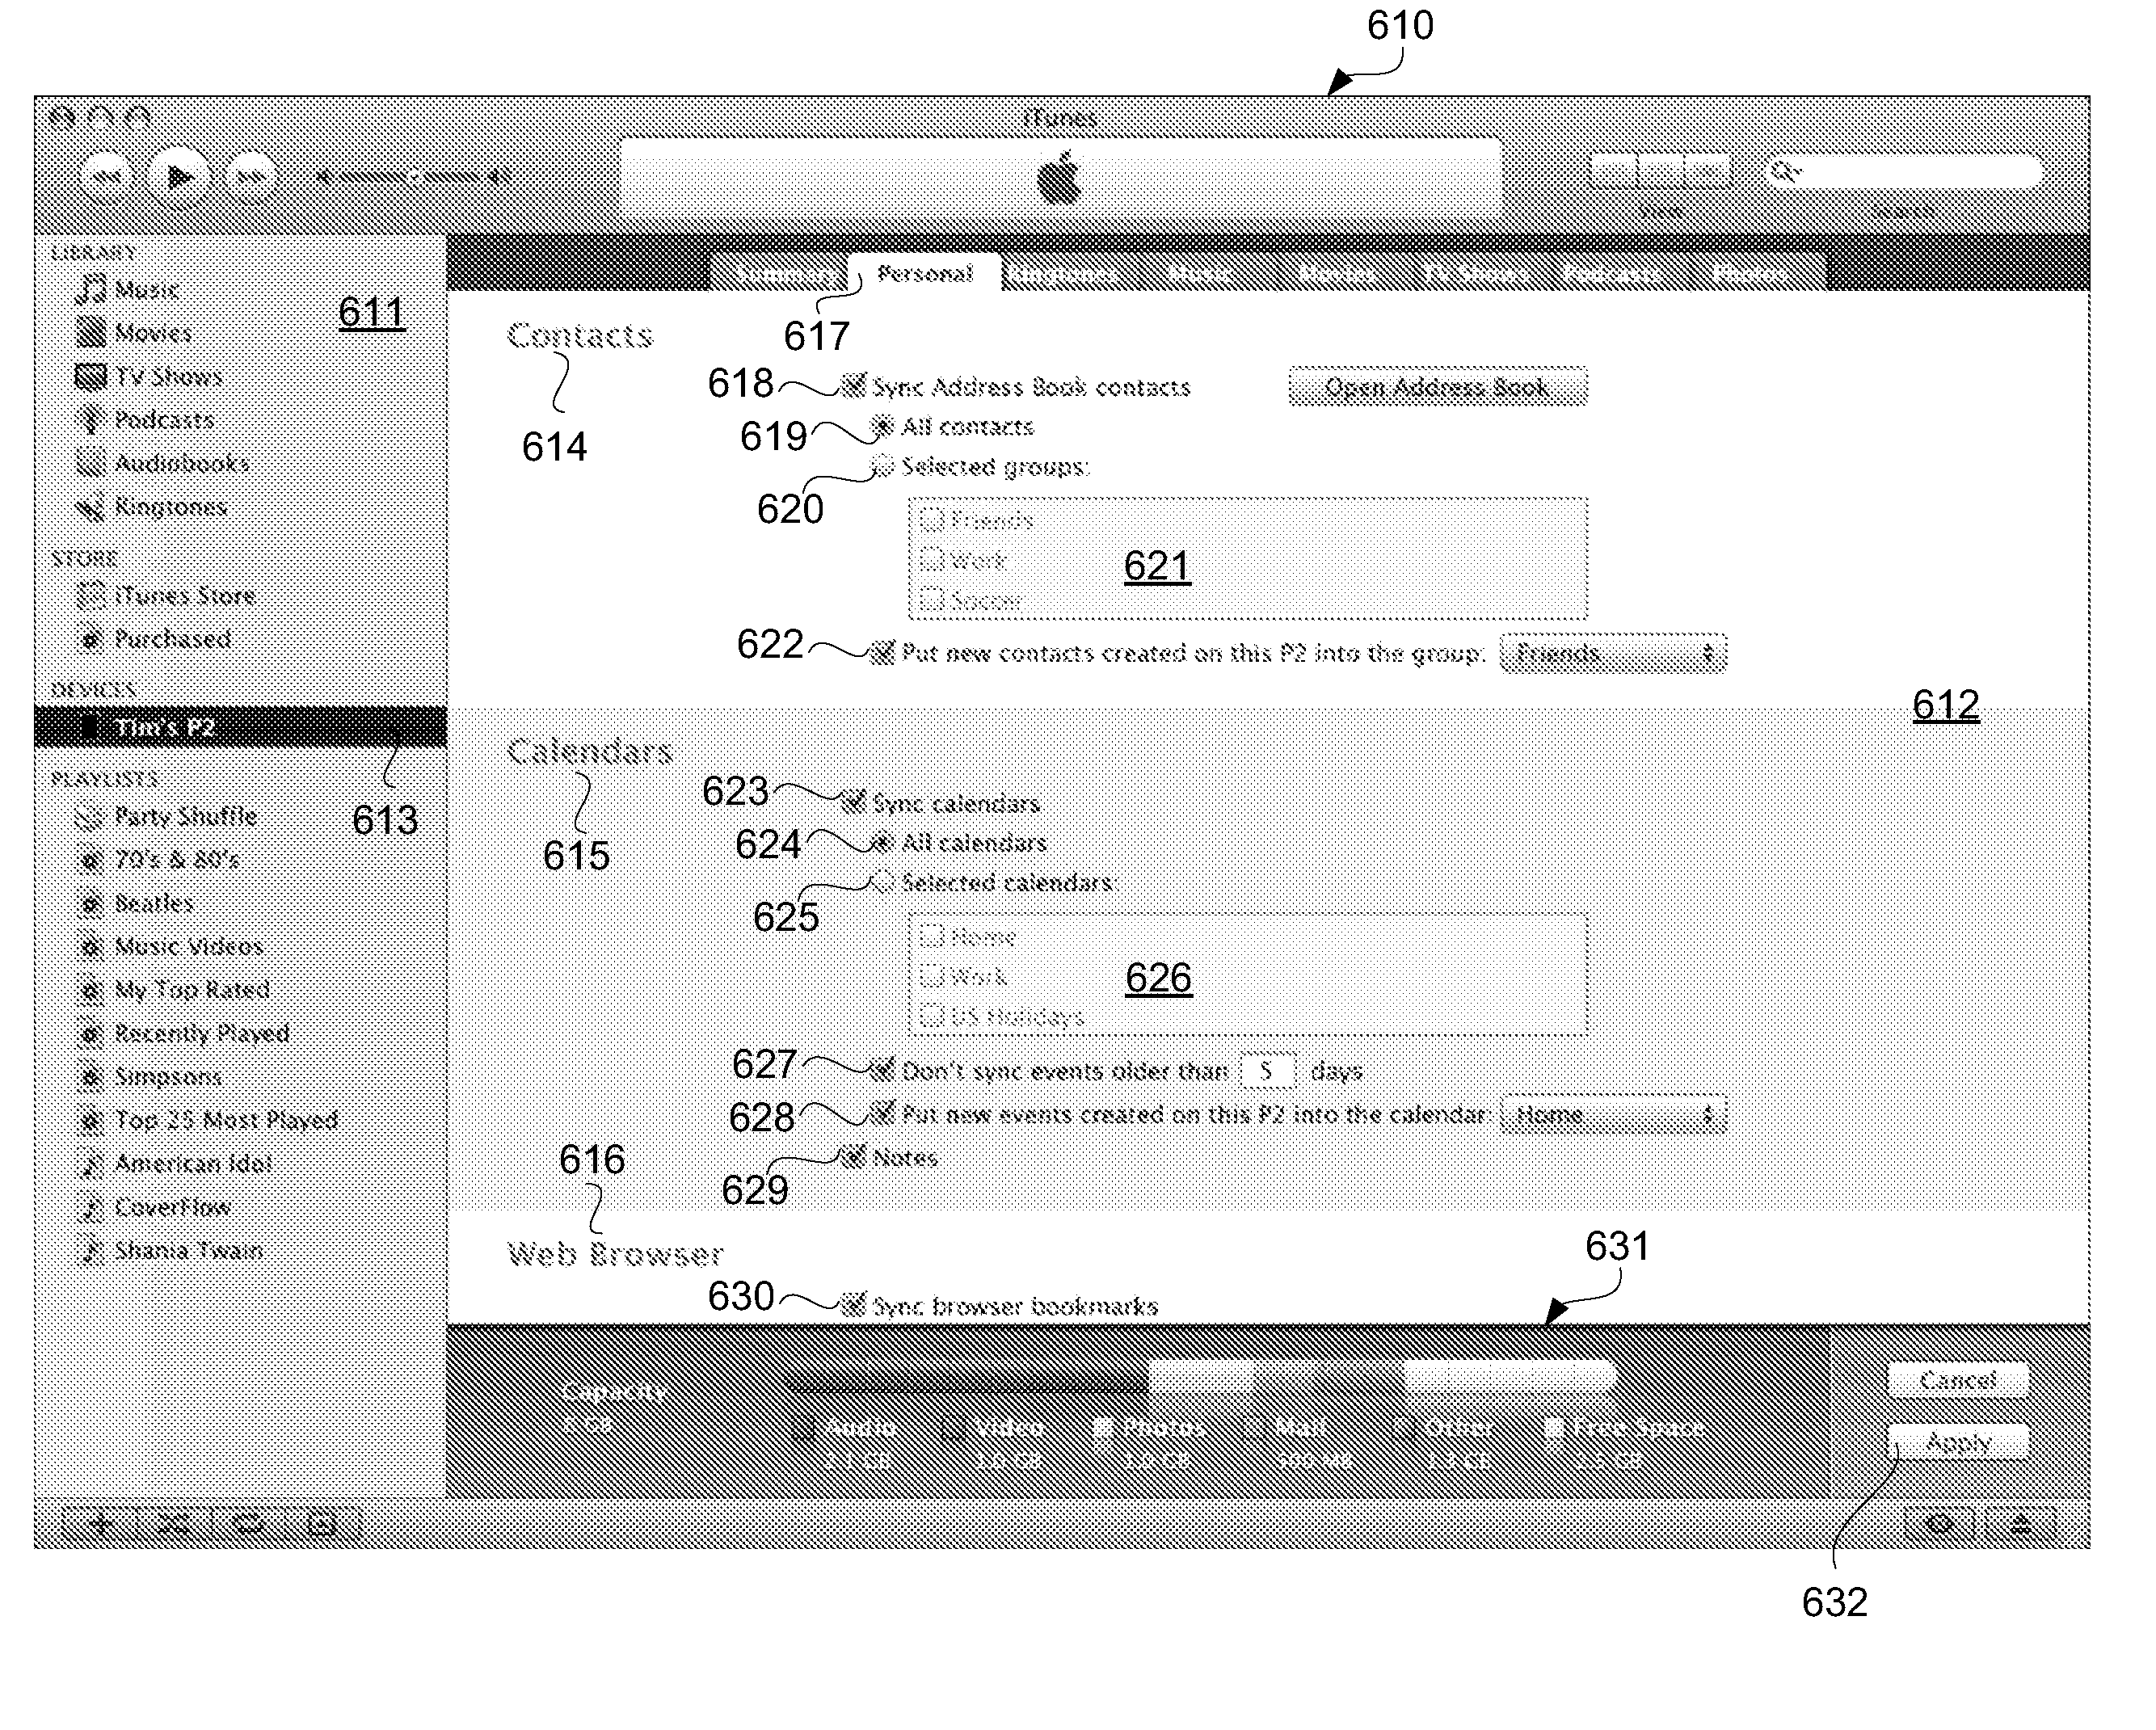 Data Synchronization with Host Device in Accordance with Synchronization Preferences